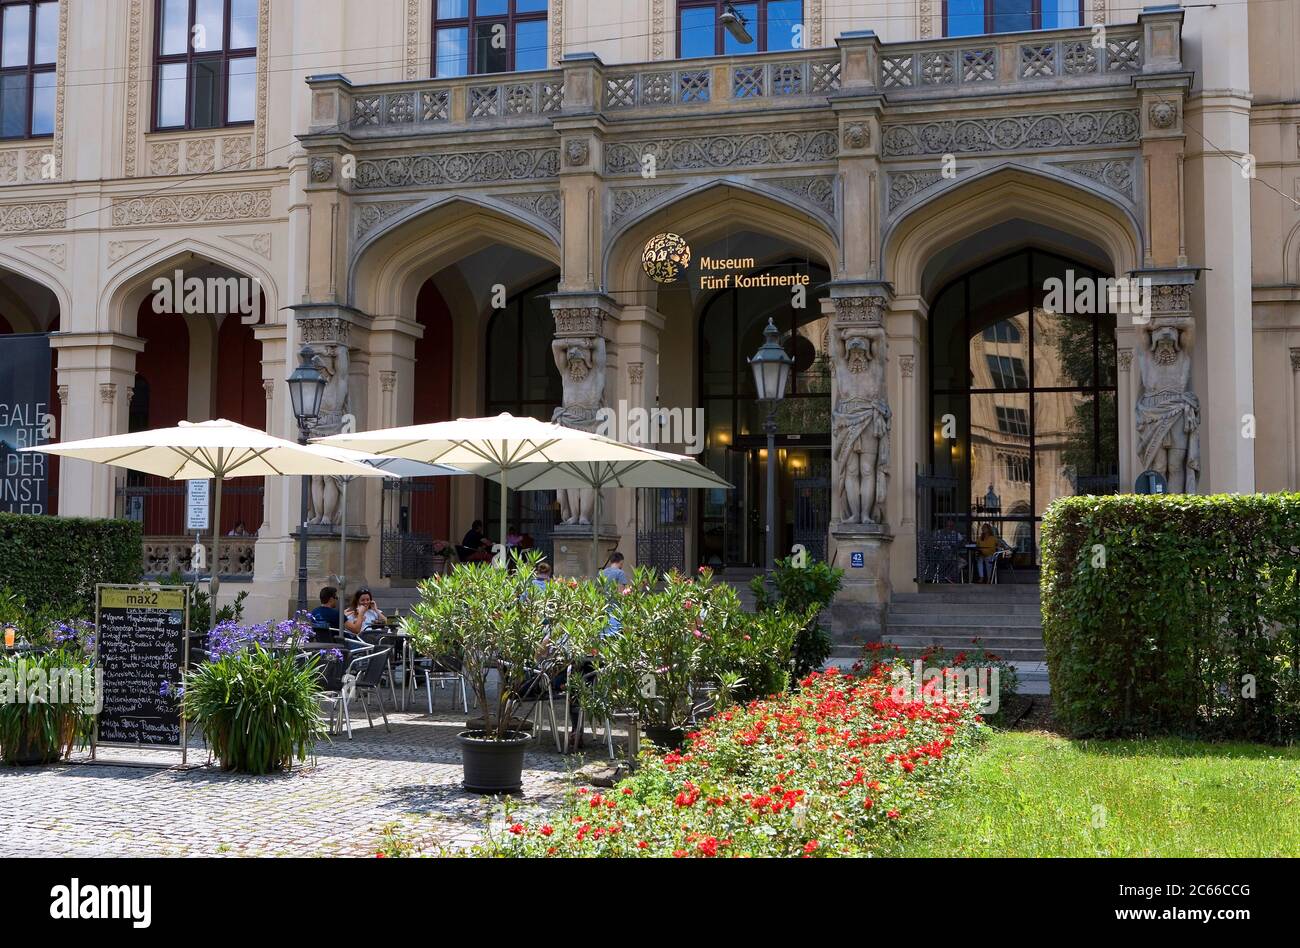 Munich, Museum Five Continents, former Bavarian Museum of Ethnology, Maximilianstraße, founded in 1862 as first ethnological museum, exterior view, café Stock Photo